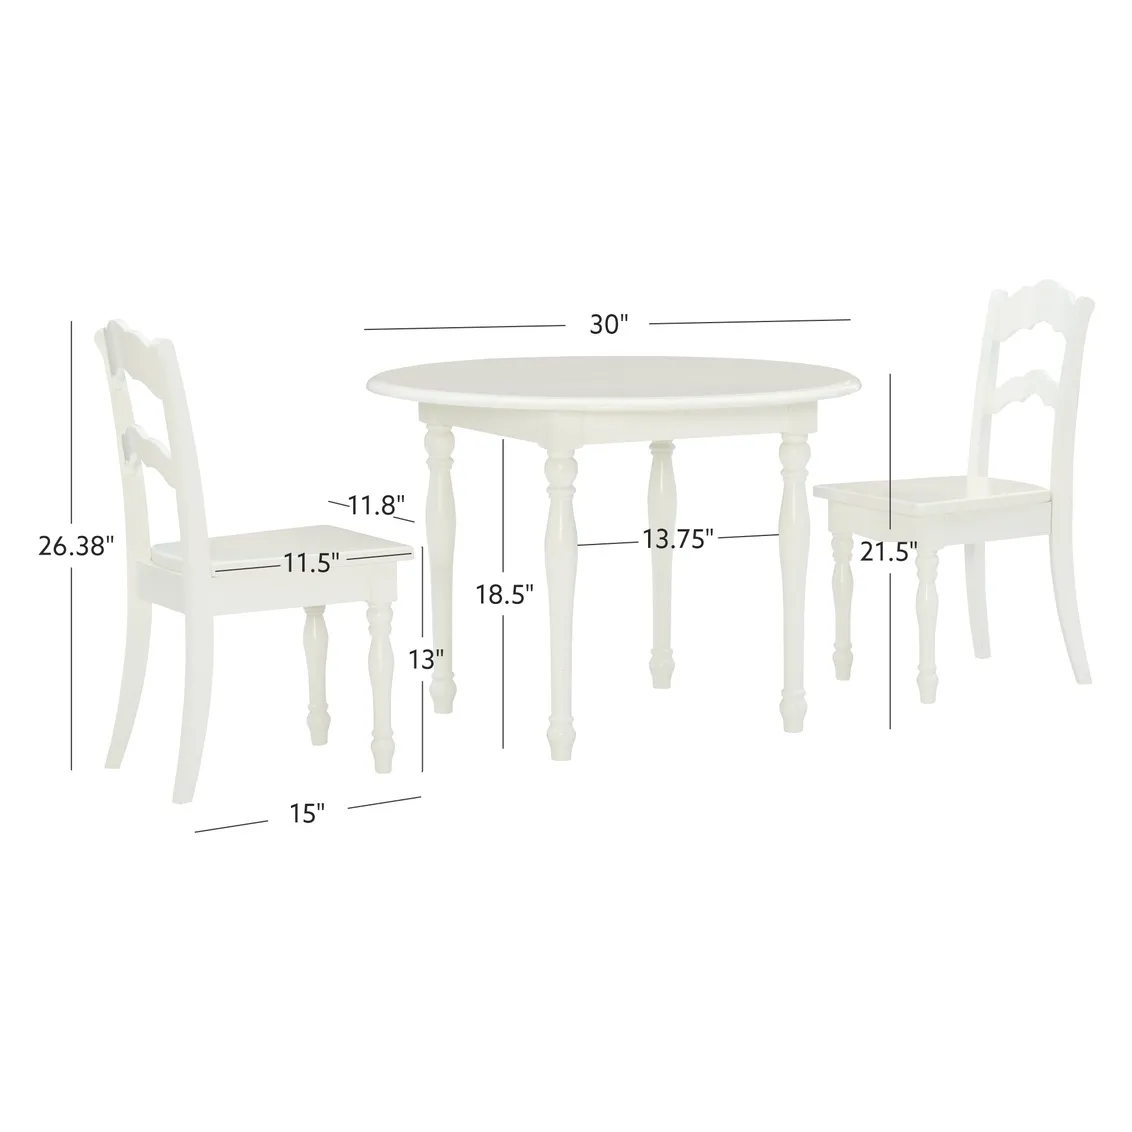 TORRI YOUTH TABLE AND 2 CHAIRS